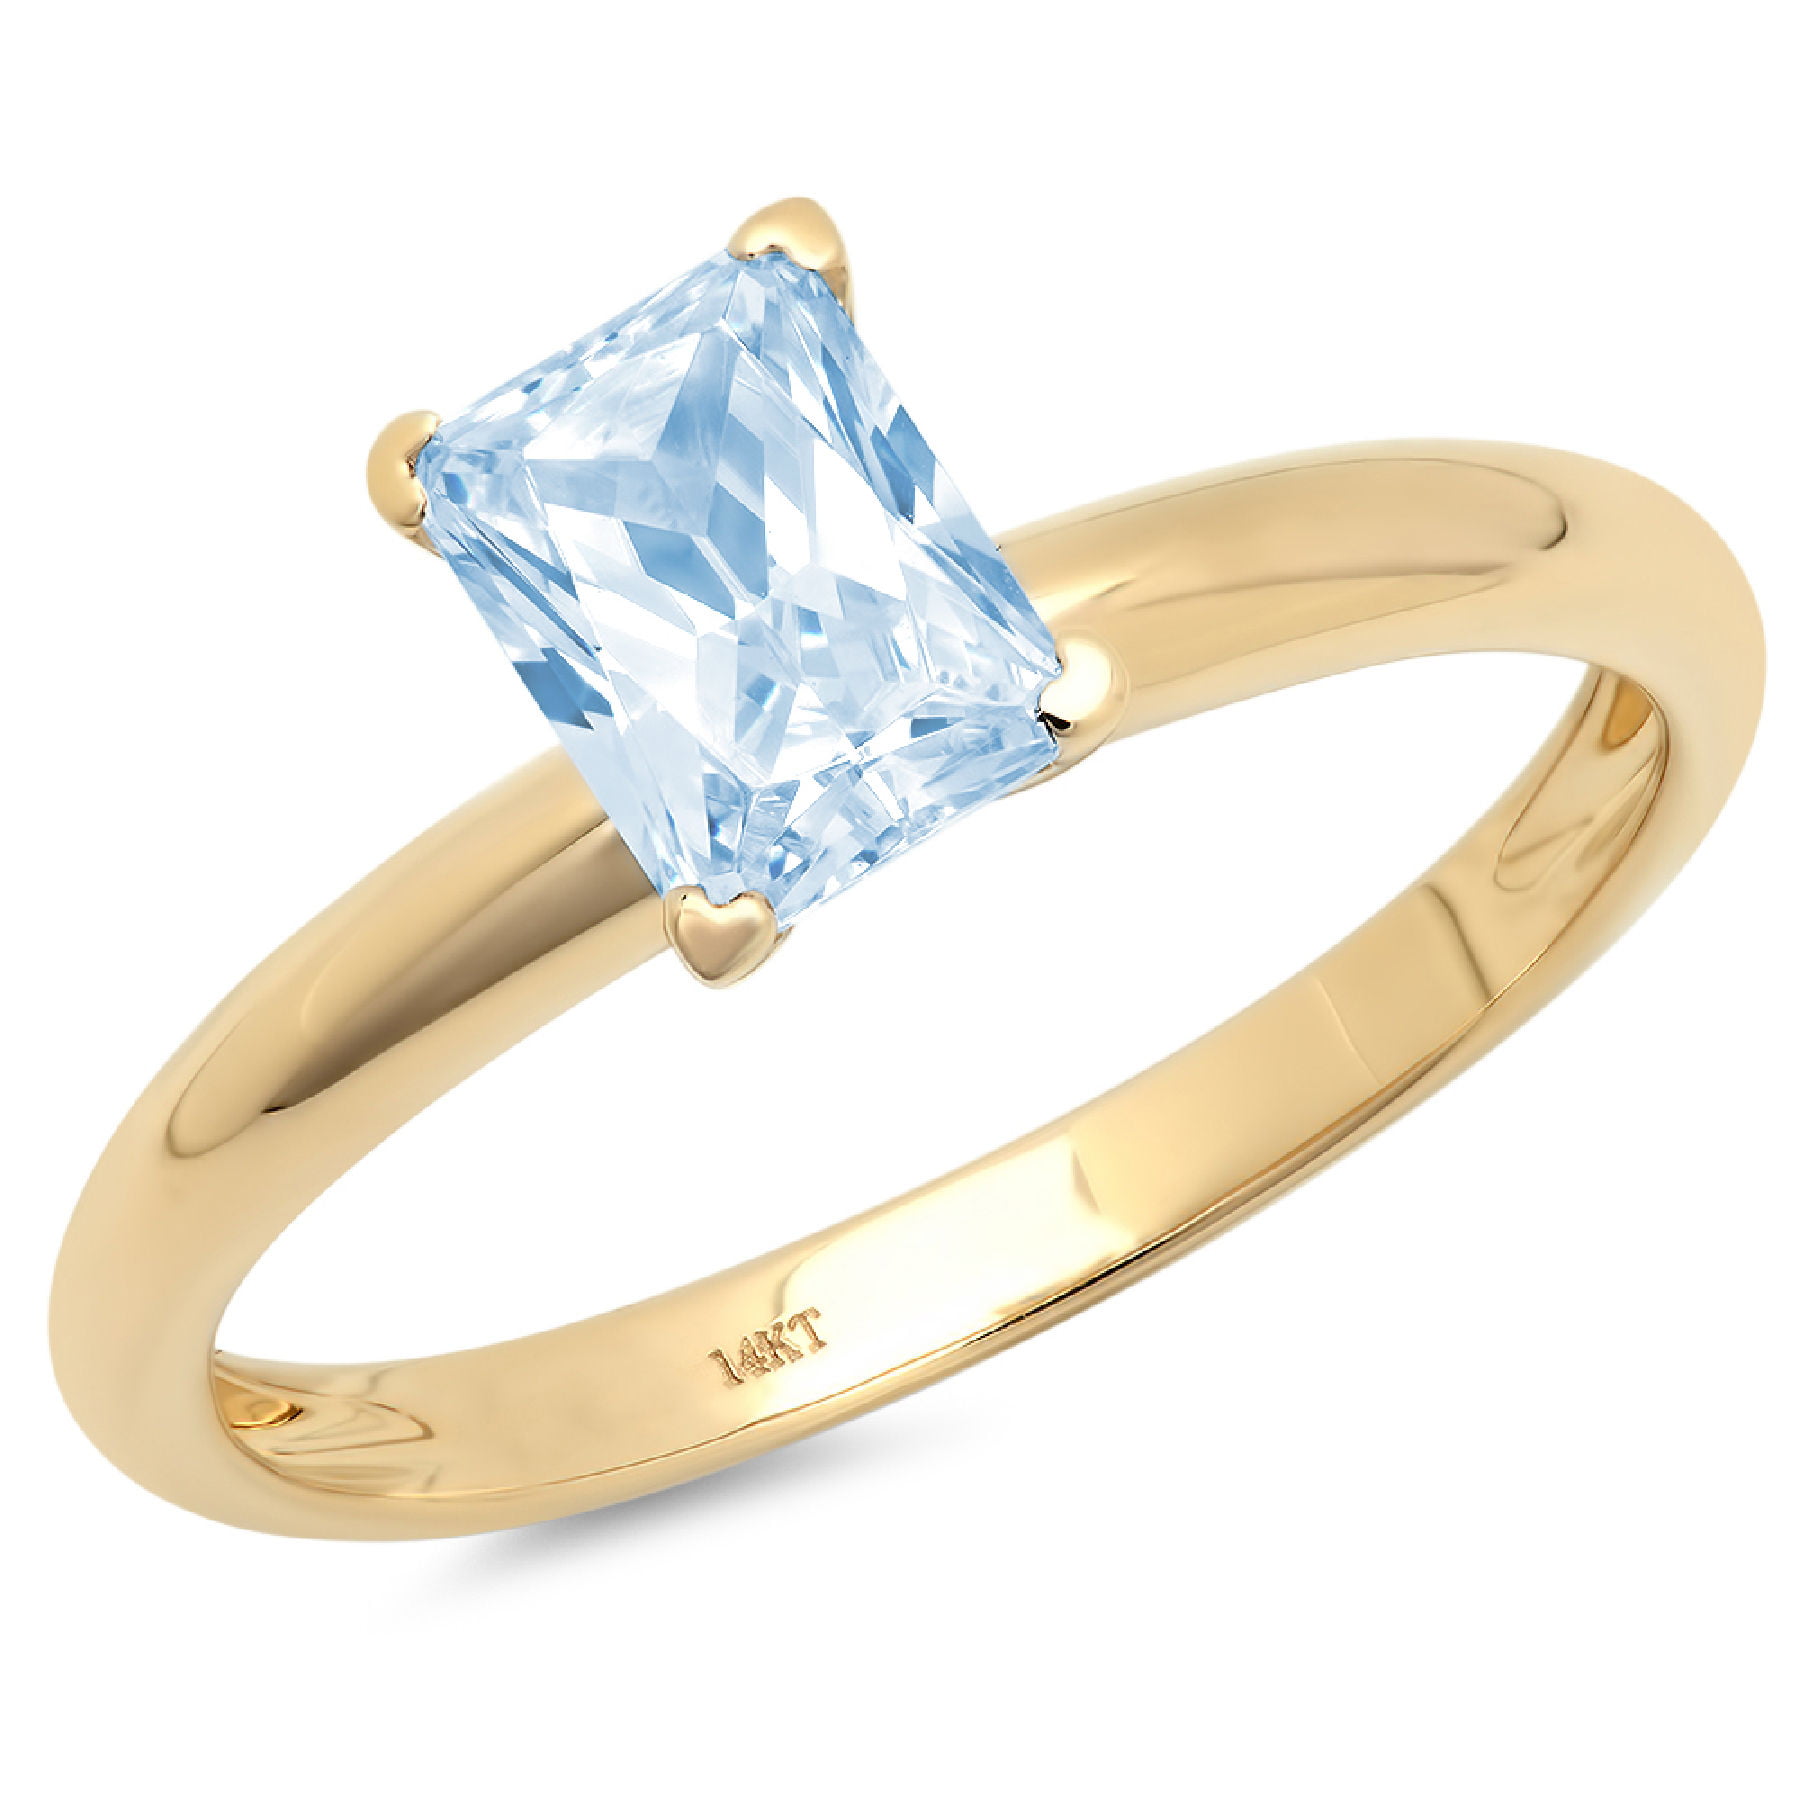 Details about   Women's Solitaire Ring 4 ct Emerald Cut Aquamarine 14k White Gold Over Silver 